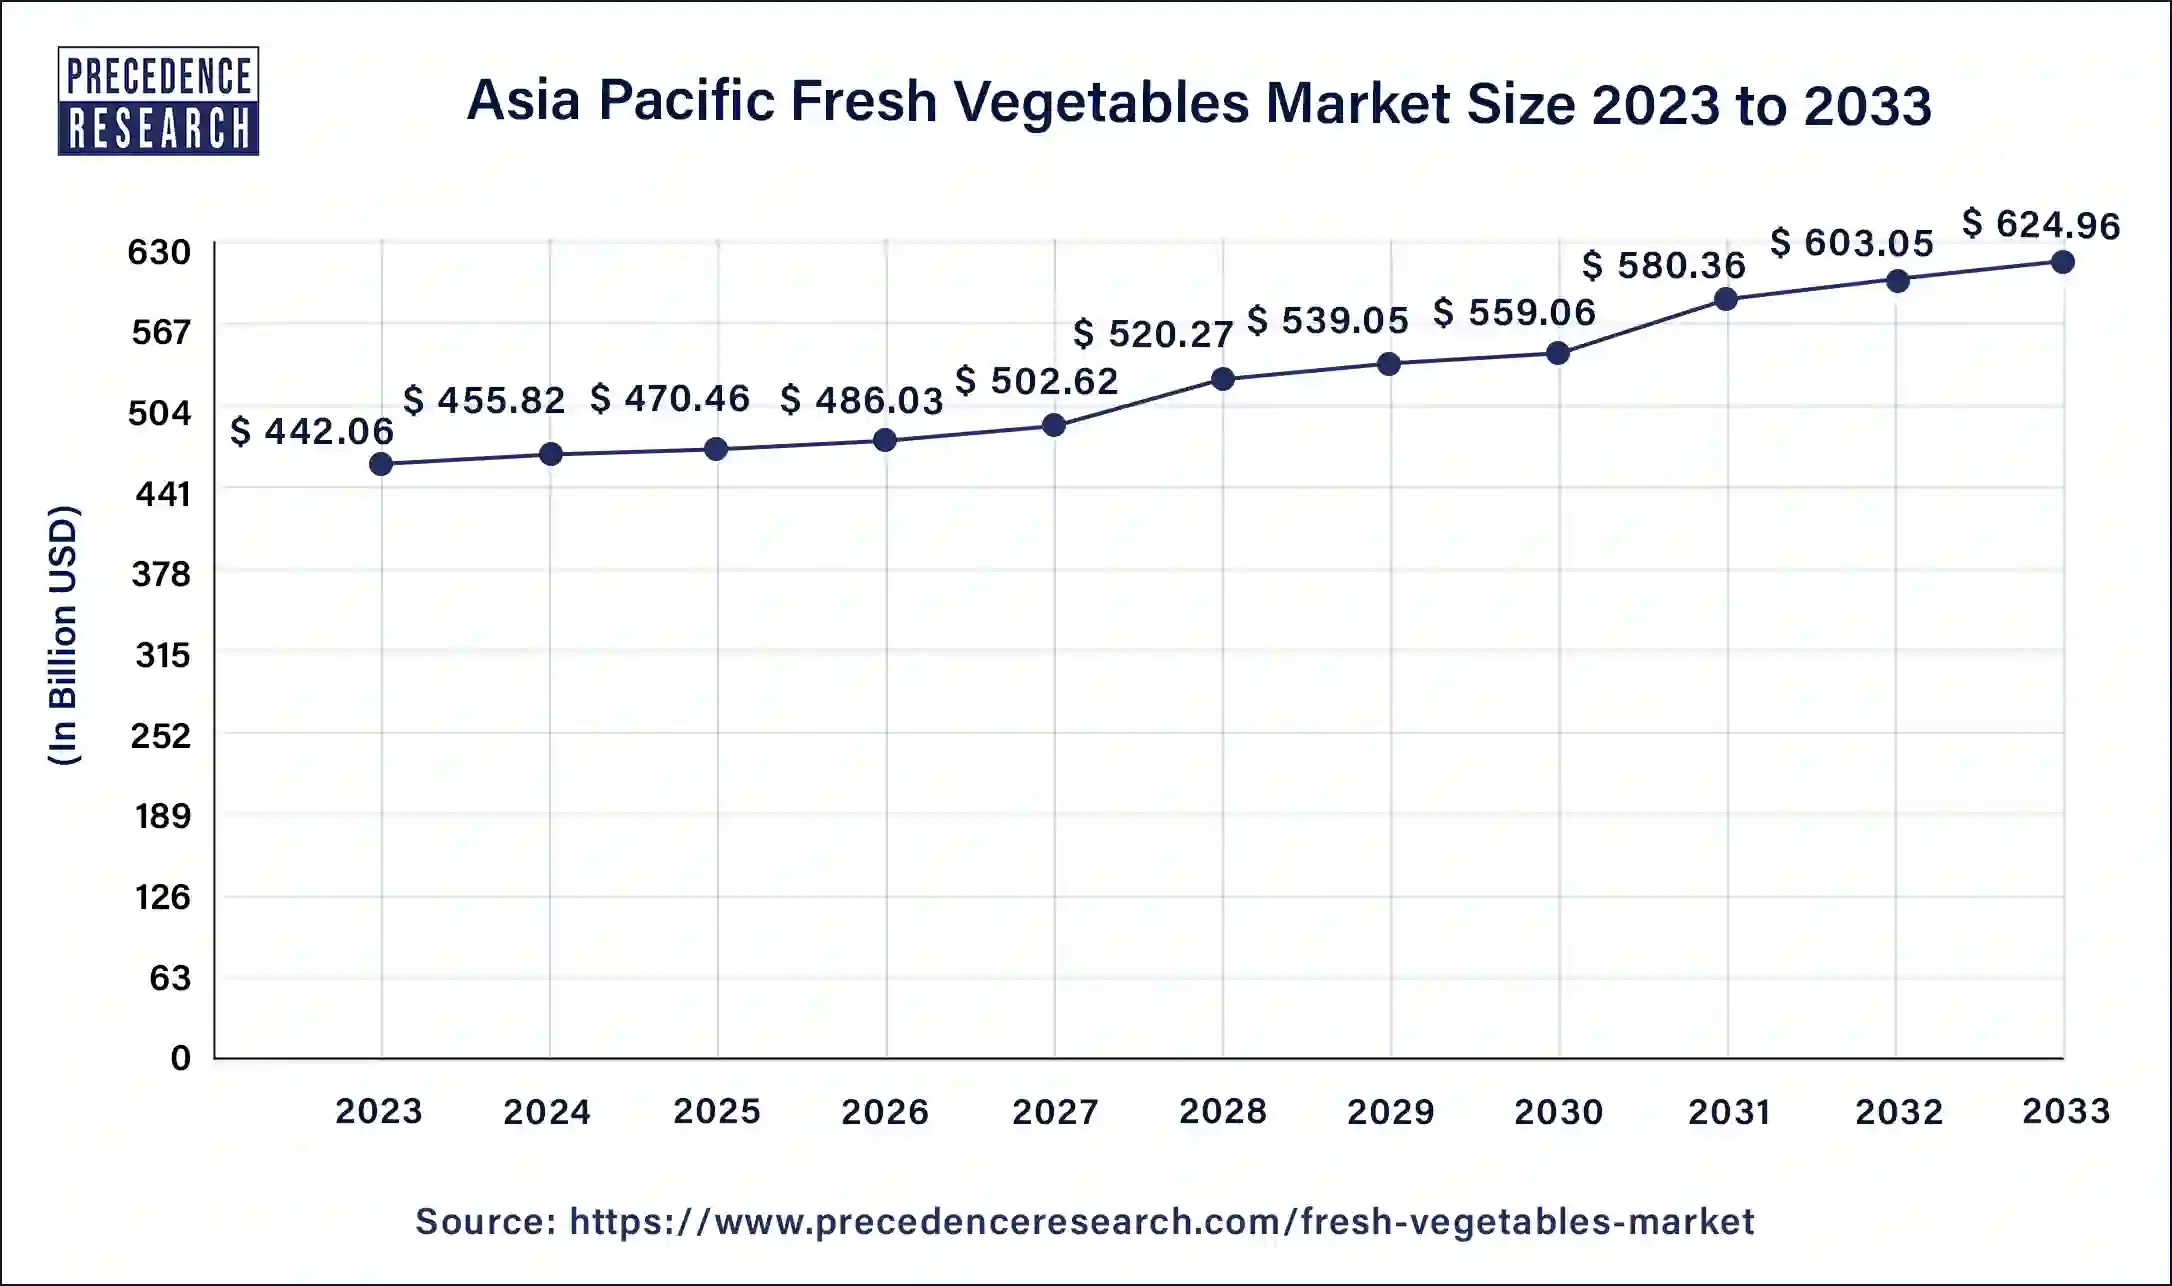 Asia Pacific Fresh Vegetables Market Size 2024 to 2033